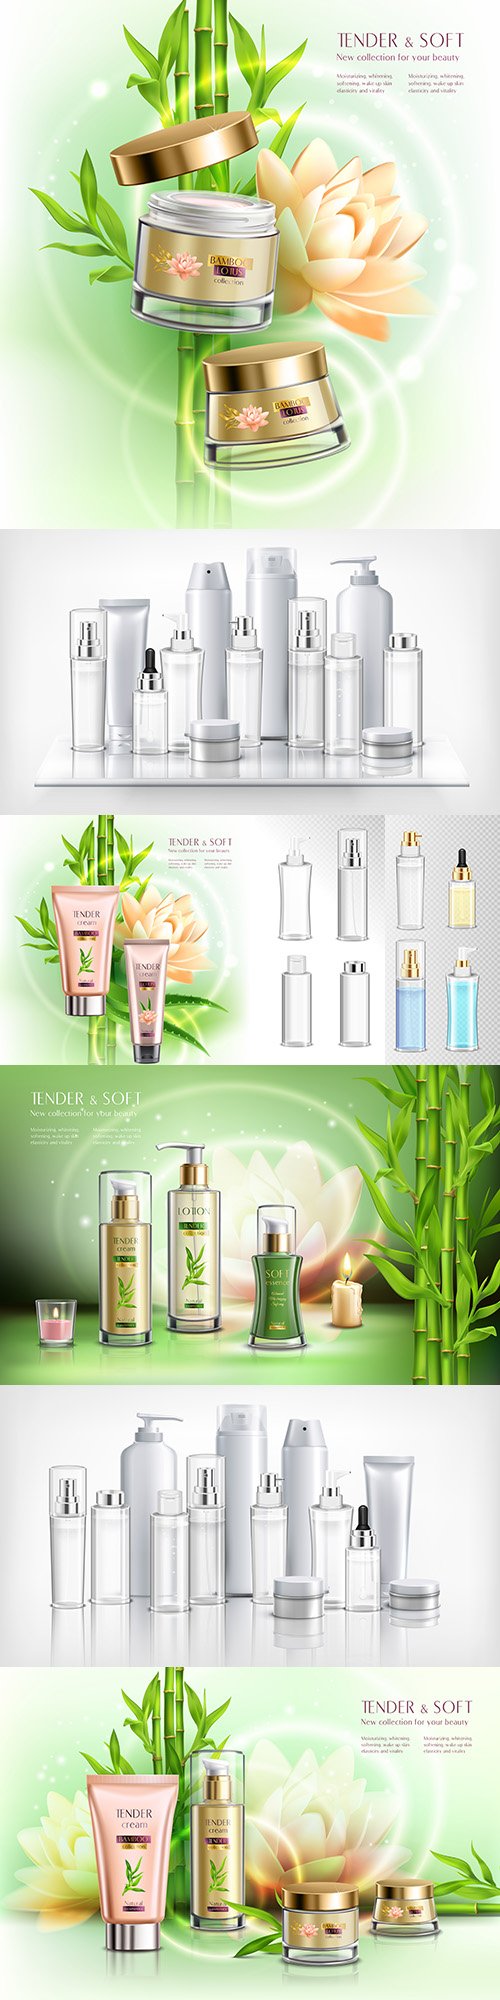 Cosmetics with lotus flowers, bamboo and realistic containers